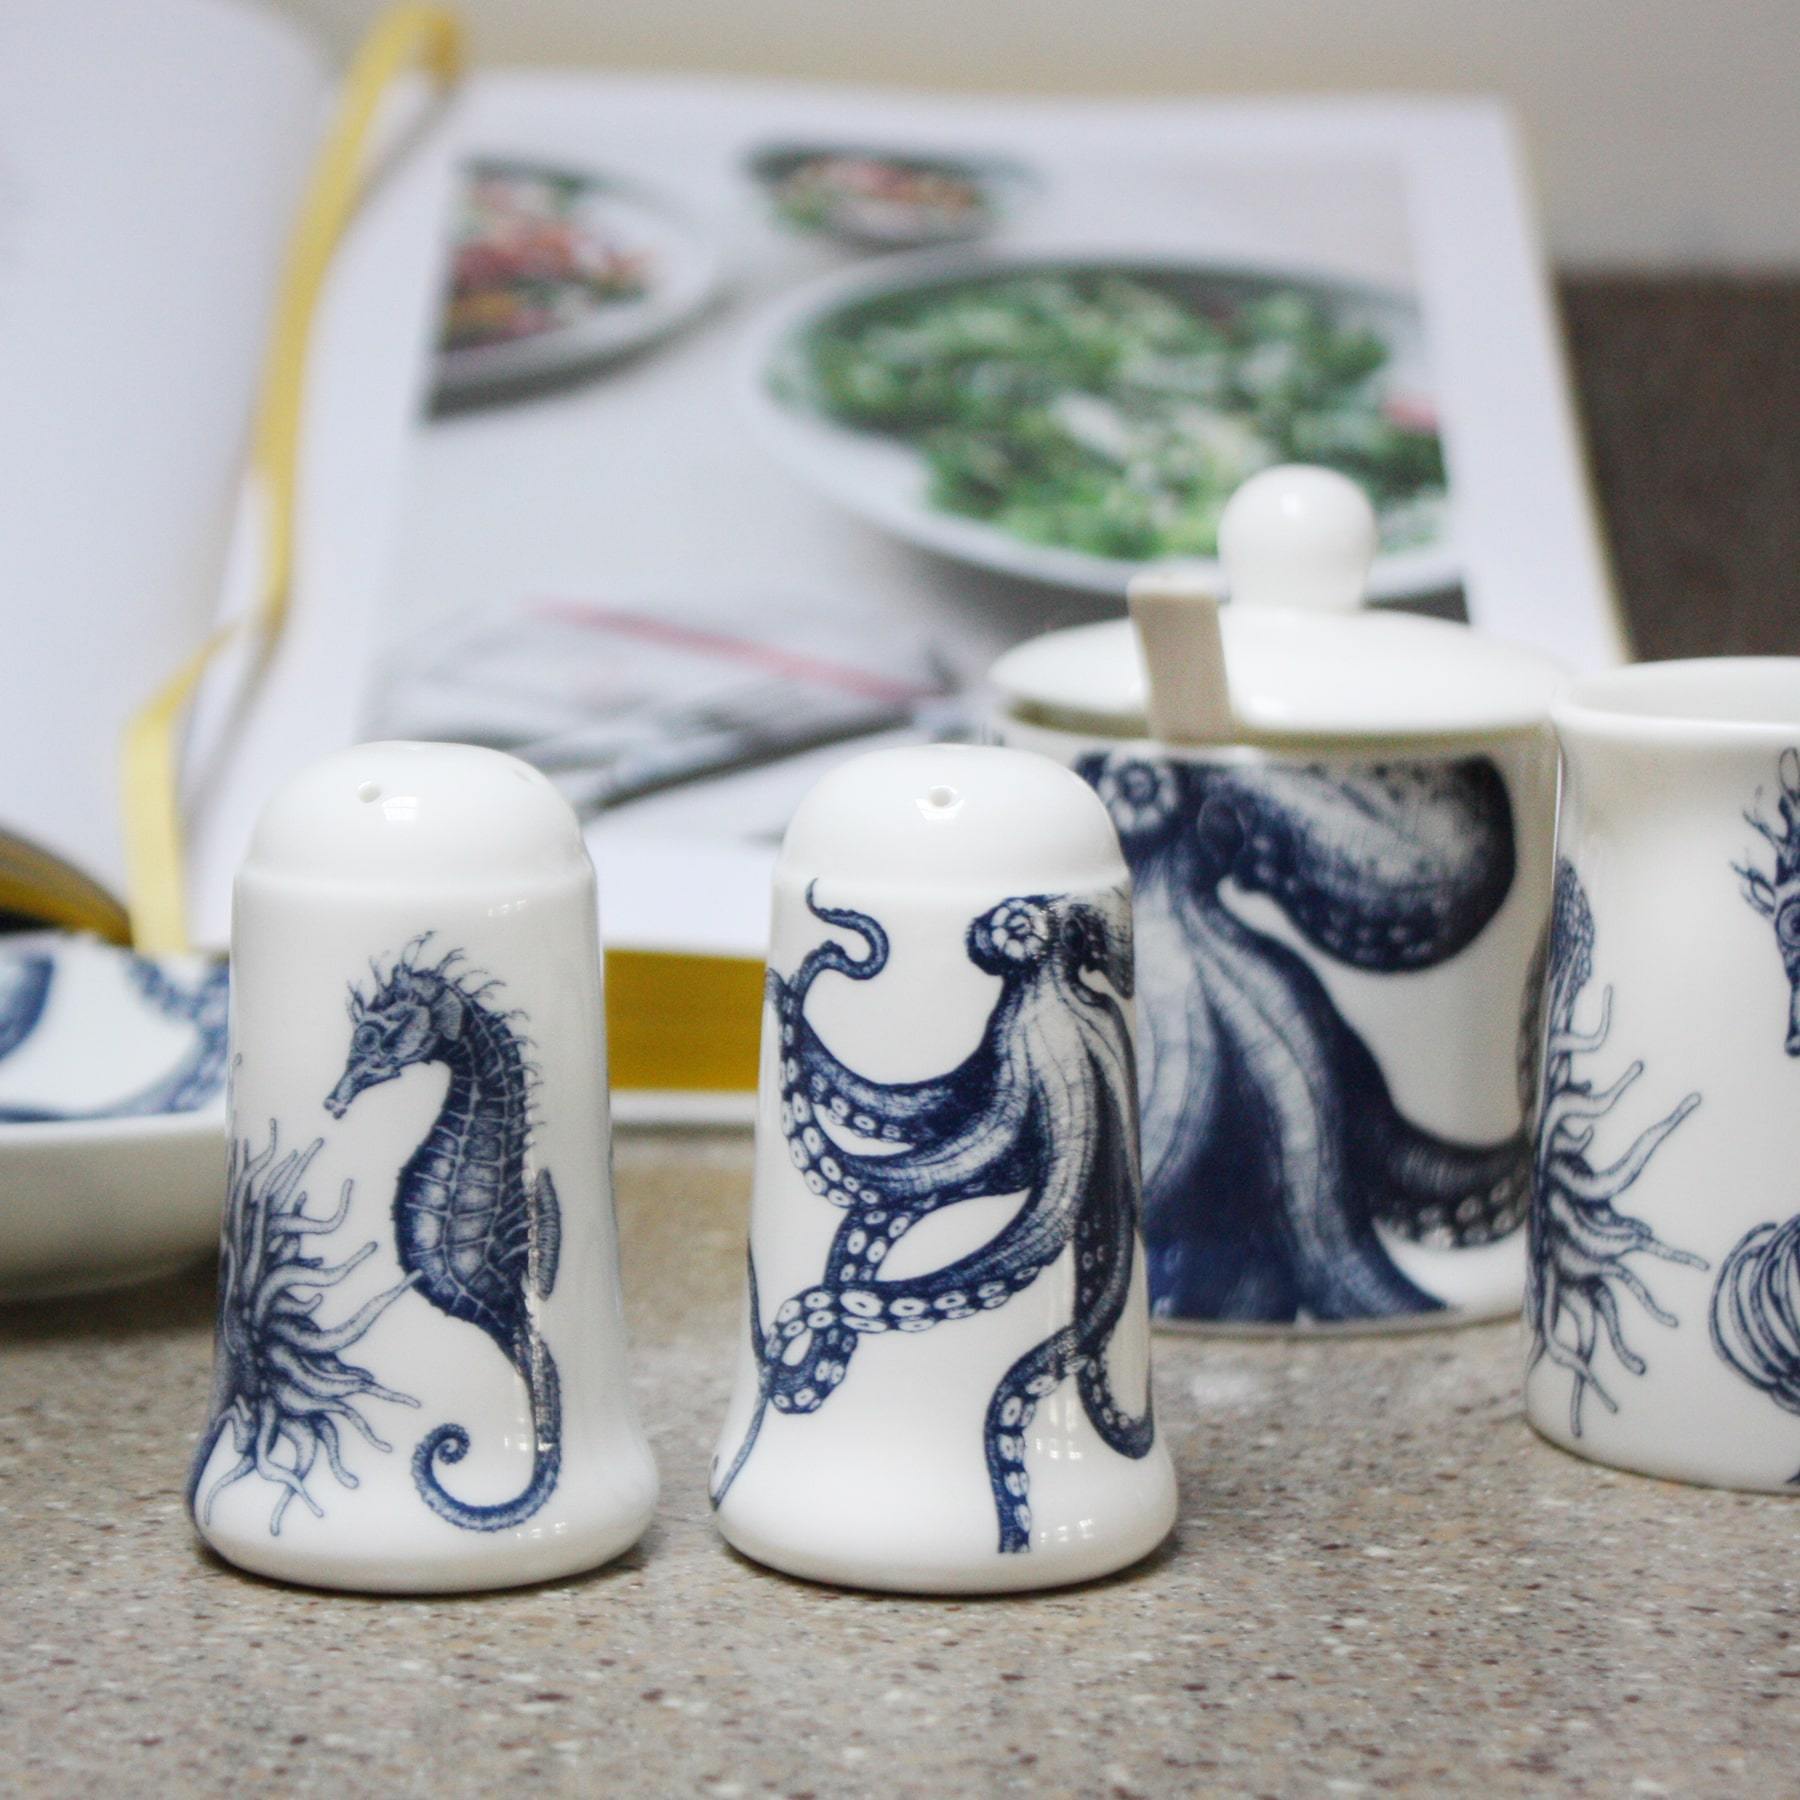 Bone china salt an pepper pots in our classic navy and white.Salt has seahorse, shell and an anenome on and the pepper has an octopus.These are both placed in from of an octopus Jam pot and a seahorse jug,in the background you can see an open cookbook